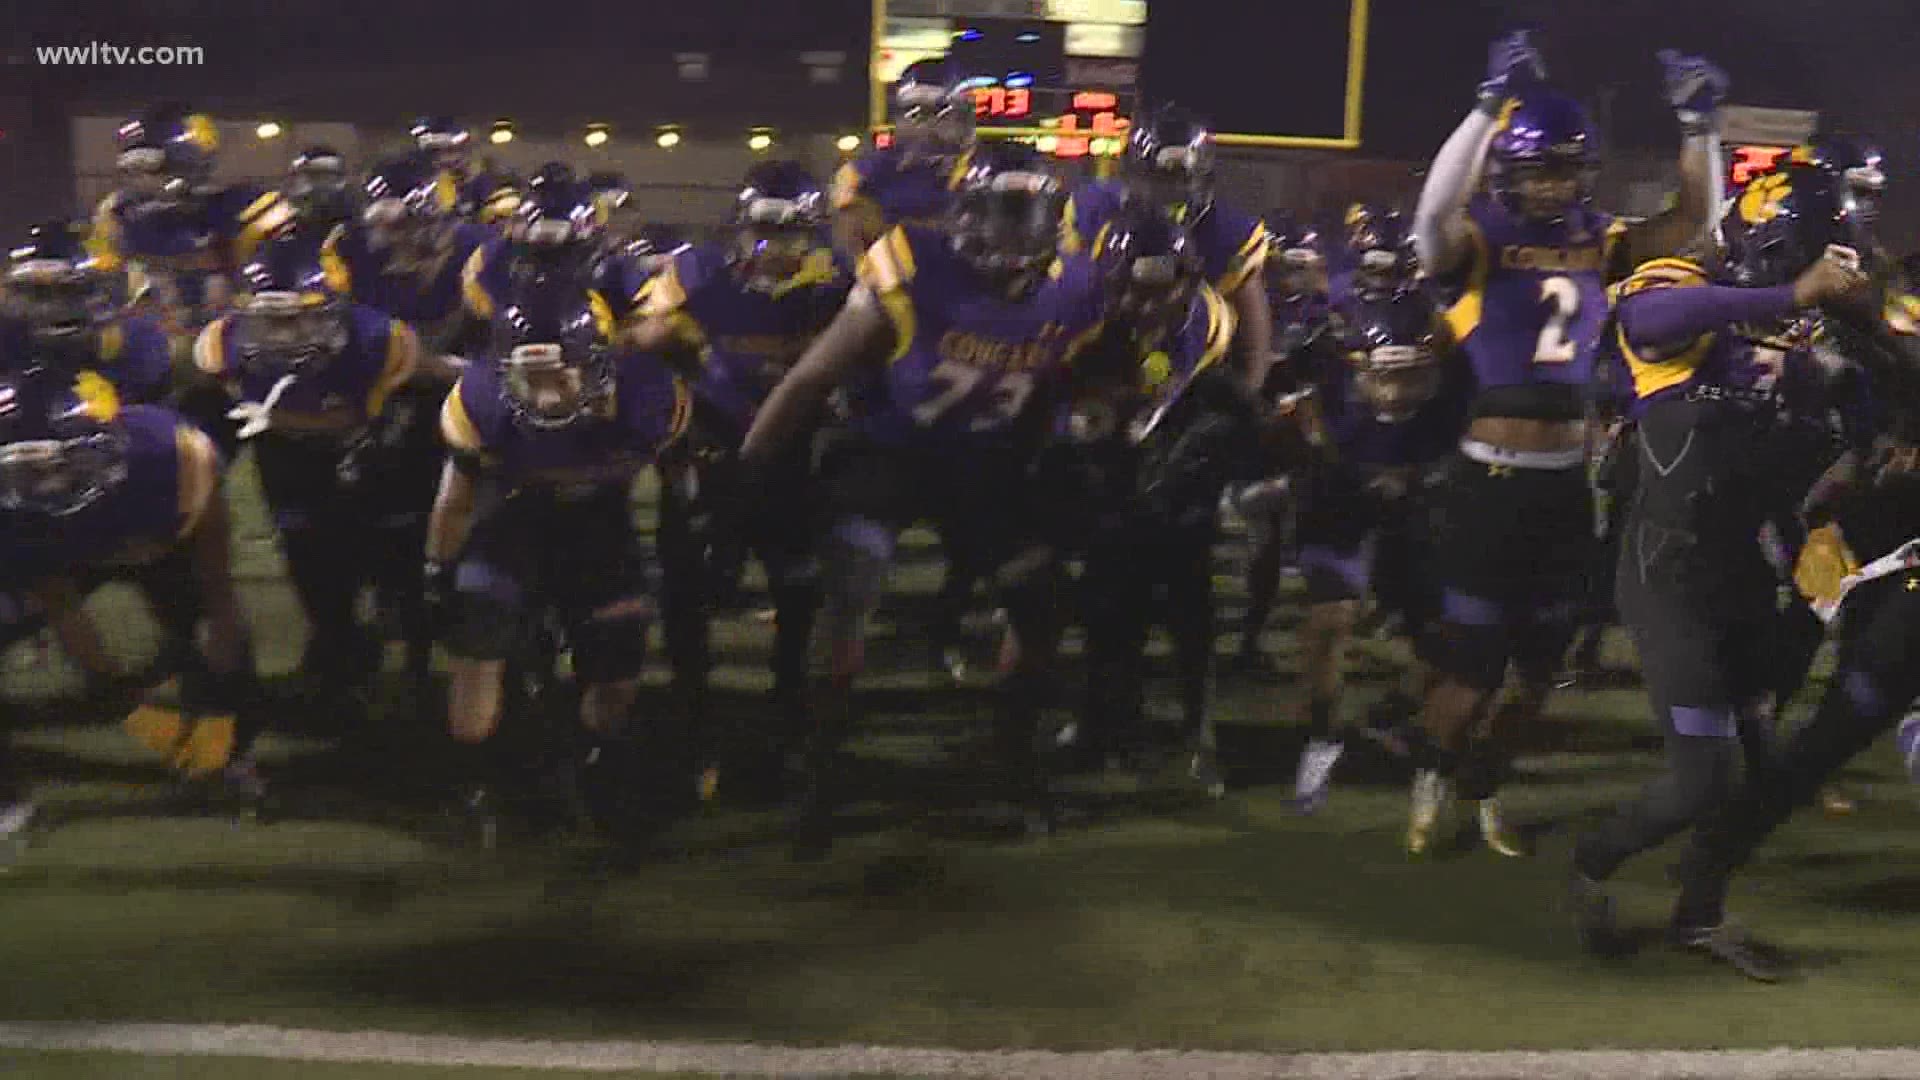 Edna Karr Cougars has landed their spot in the chance to play in the state championship.